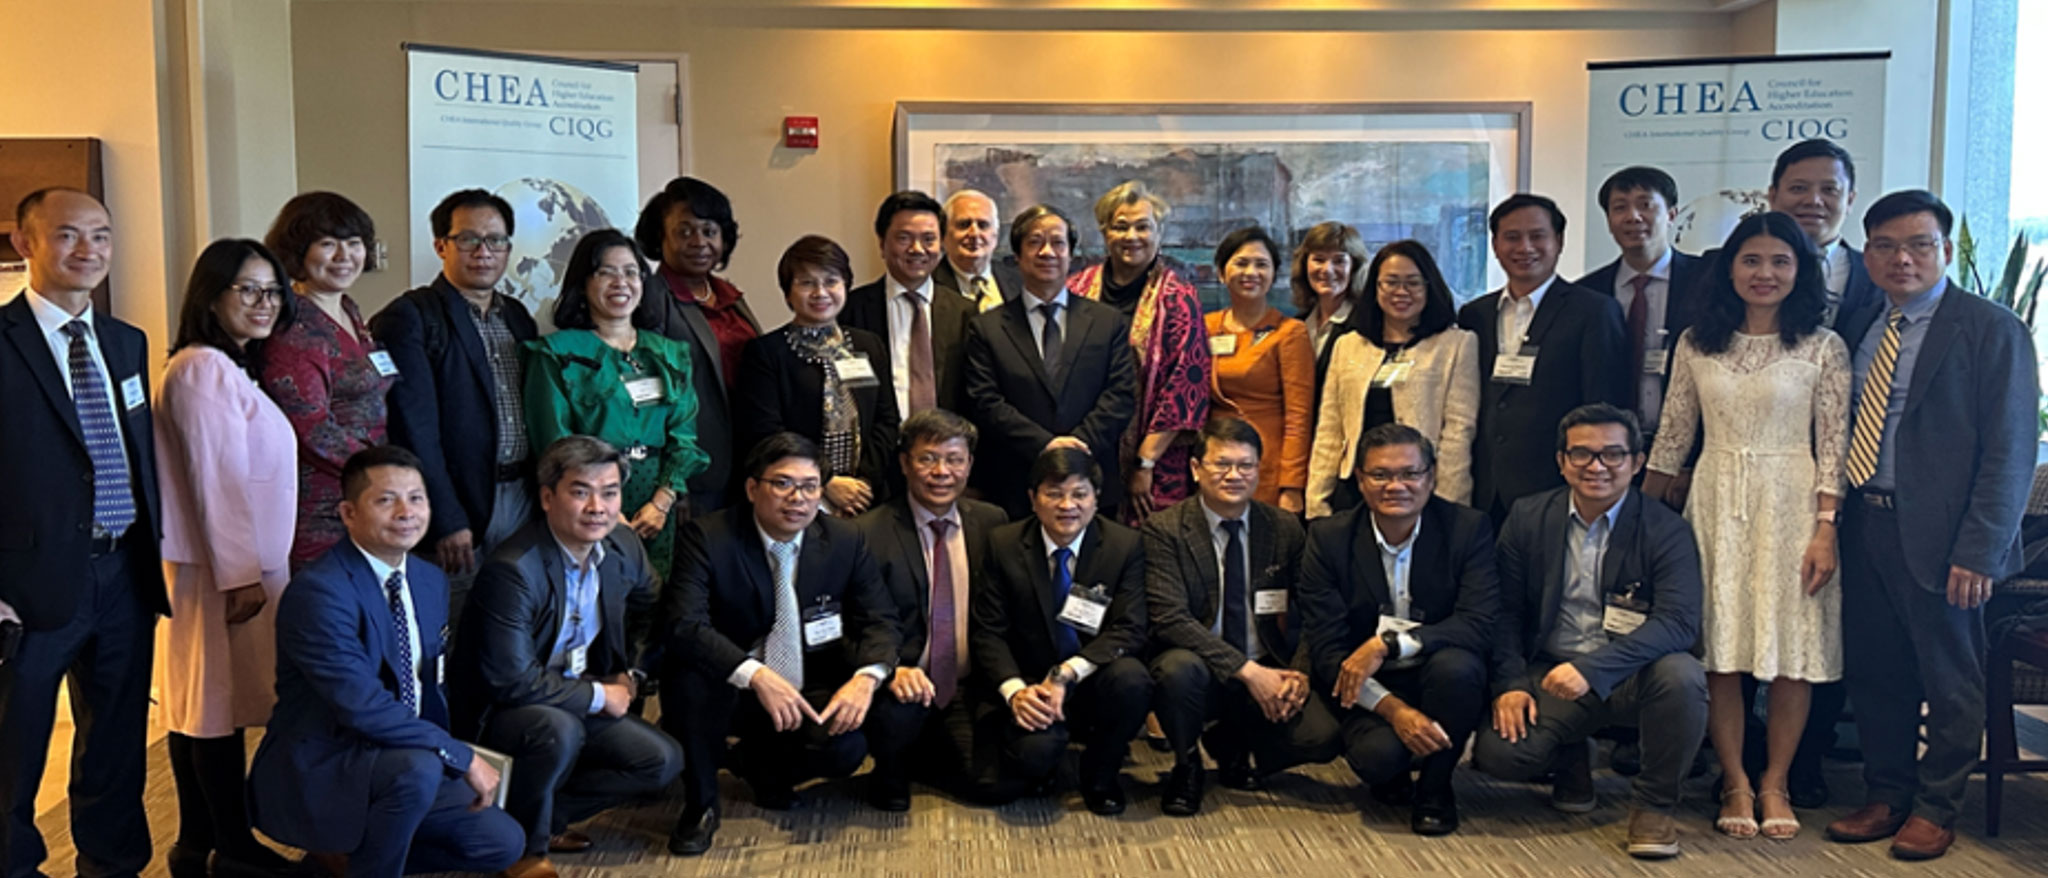 CHEA members and Vietnam Delegation